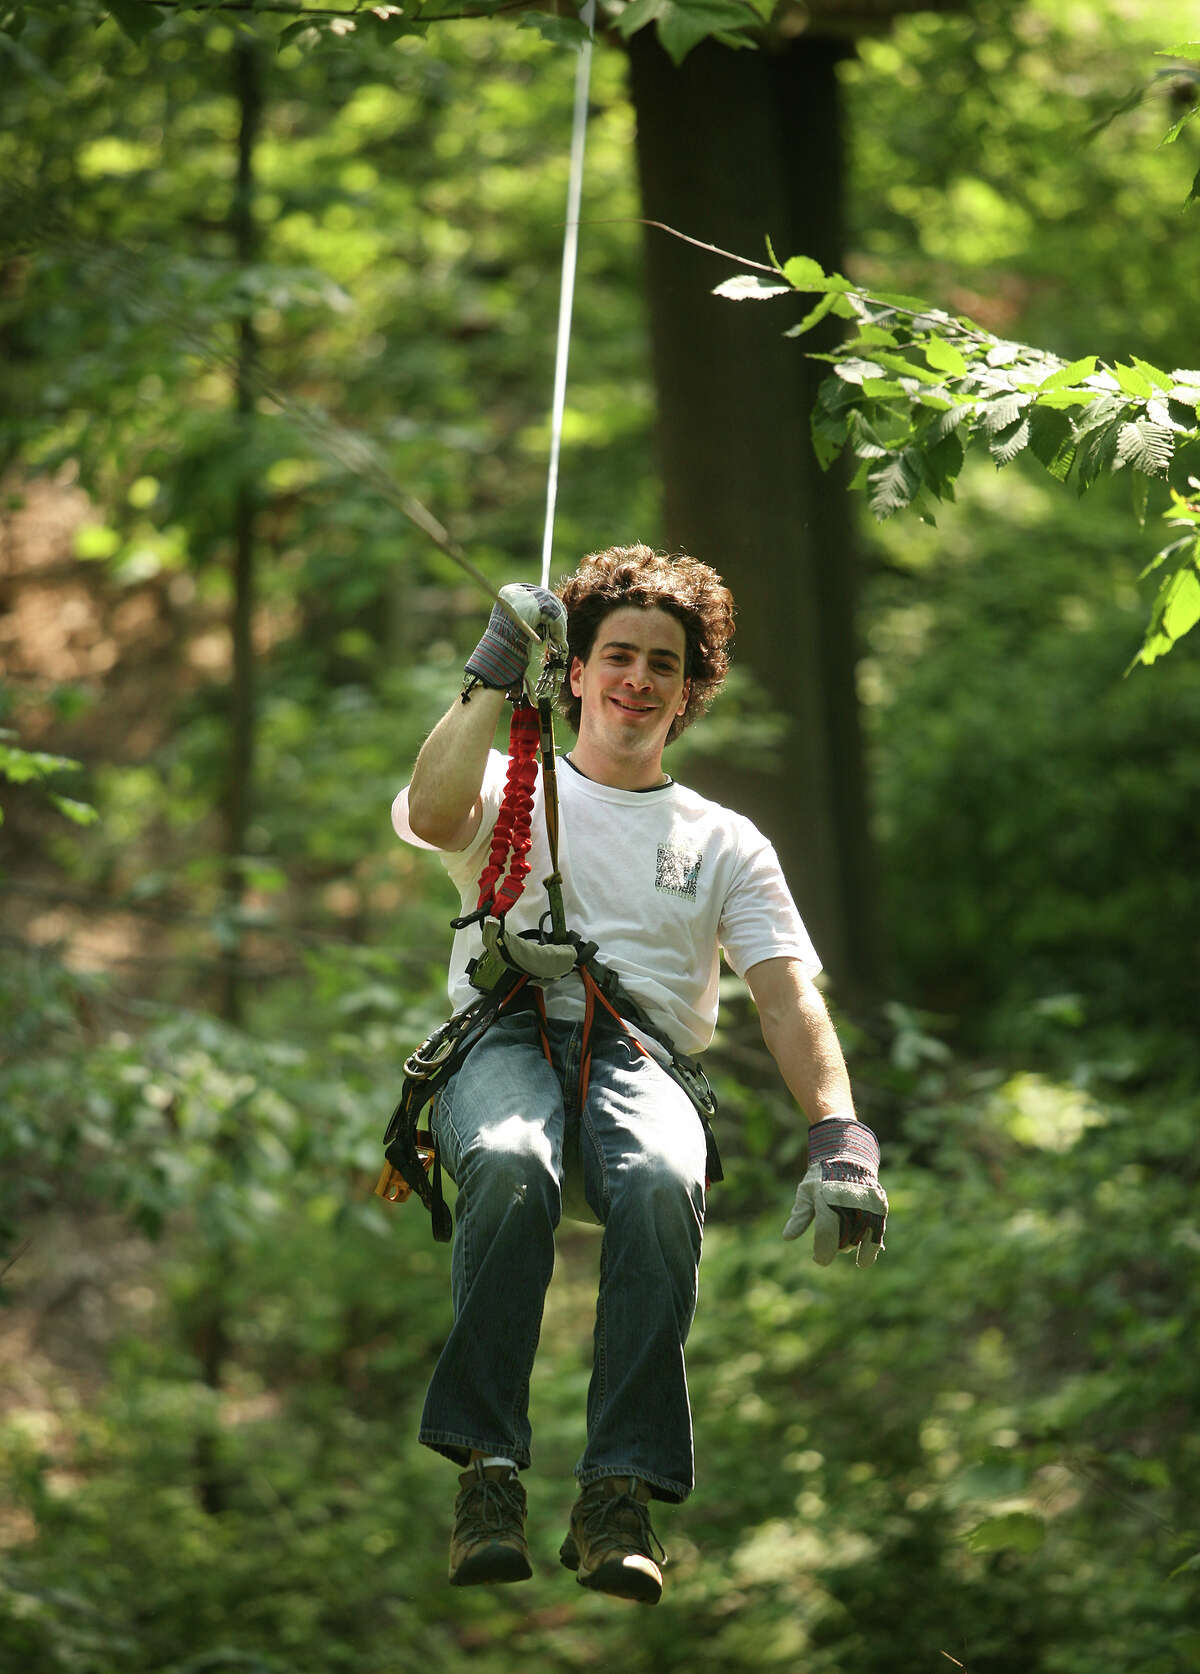 Zip Line You don't have to go to the jungle to get the rush of soaring through the trees on a zip line–you can do it right here in Bridgeport. Head to Portland if you want to try rock climbing and cliff jumping as well as zip lining. Adventure Park at the Discovery MuseumBrownstone Park ZiplinesSkydive Danielson and the Adventure Park at Storrs